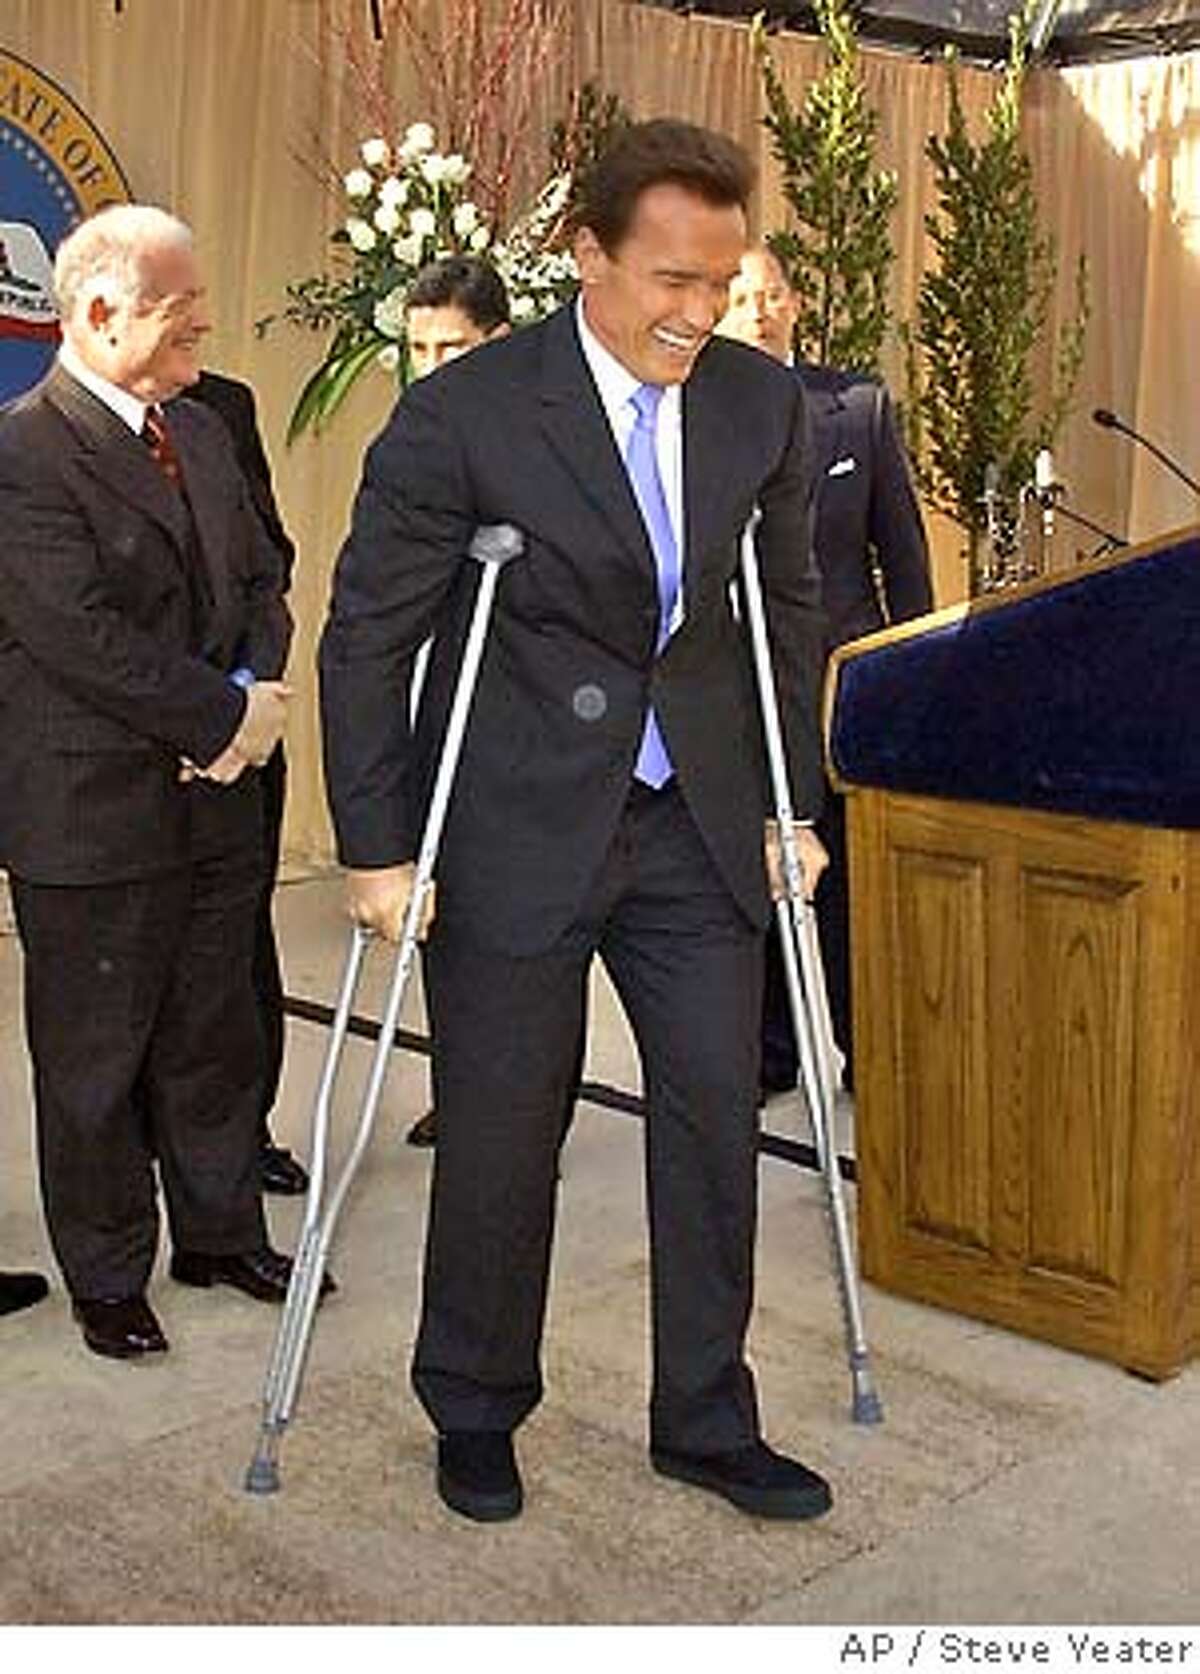 �Gov. Arnold Schwarzenegger's uses crutches to walk to his table after speaking at a a luncheon following his second inauguration in Sacramento, Calif., Friday, Jan. 5, 2006.(AP Photo/Steve Yeater,Pool)